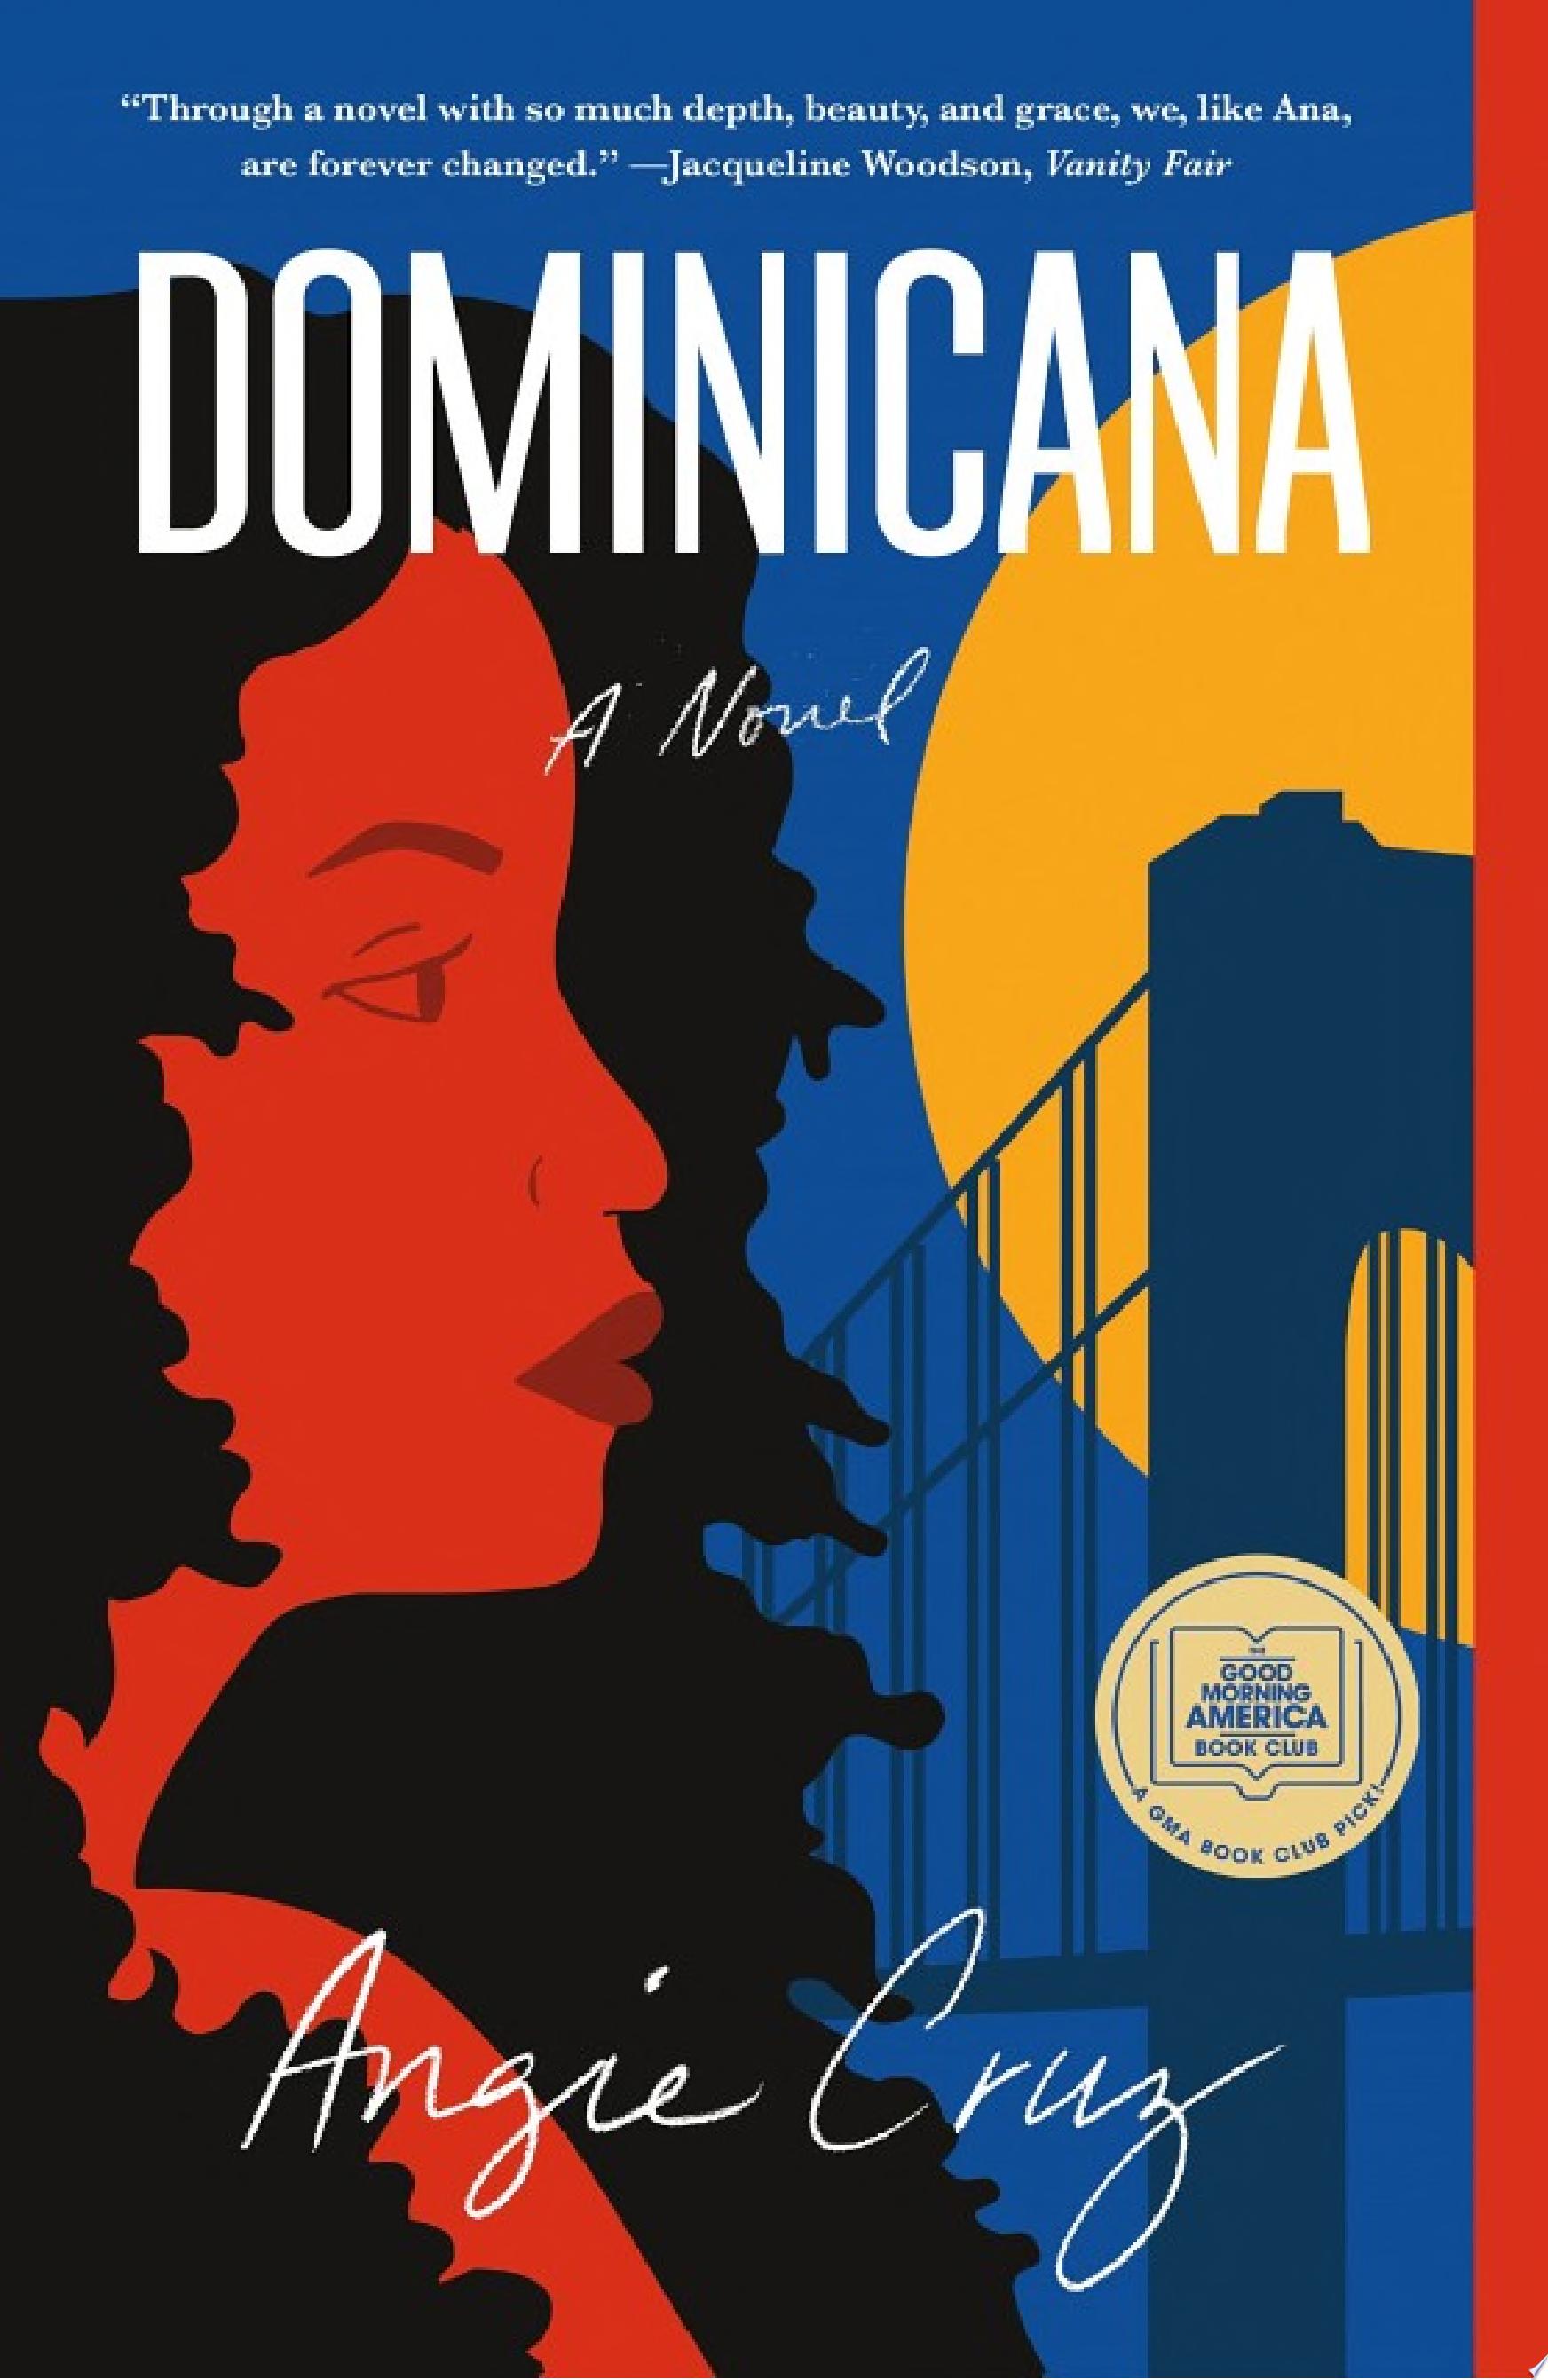 Image for "Dominicana"